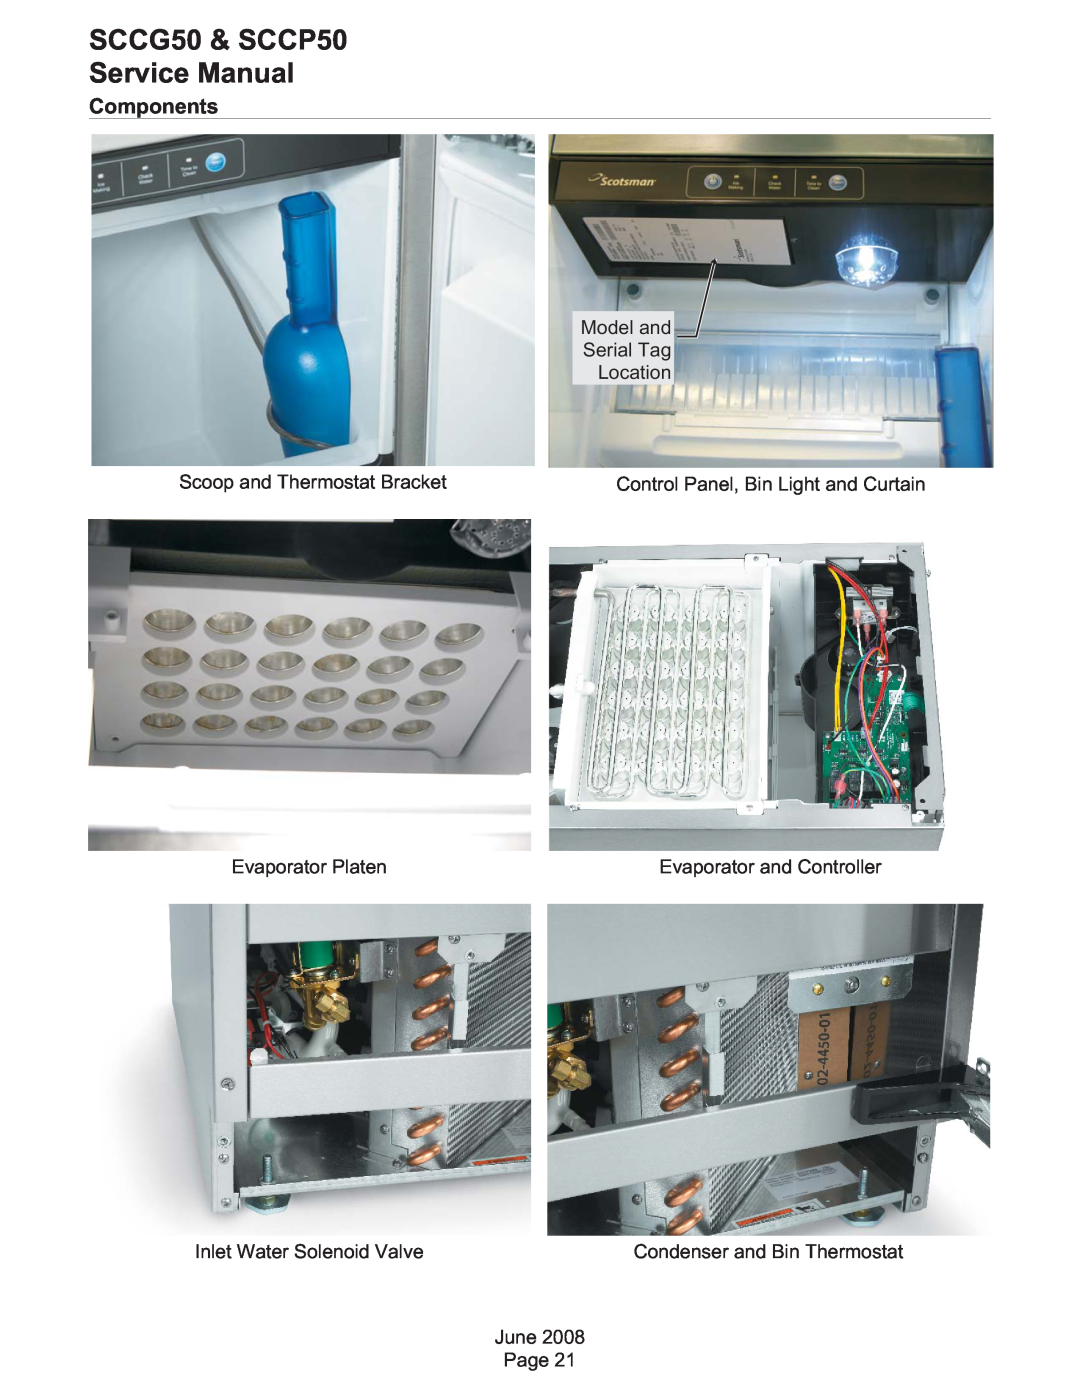 Scotsman Ice service manual Components, SCCG50 & SCCP50 Service Manual, Condenser and Bin Thermostat 